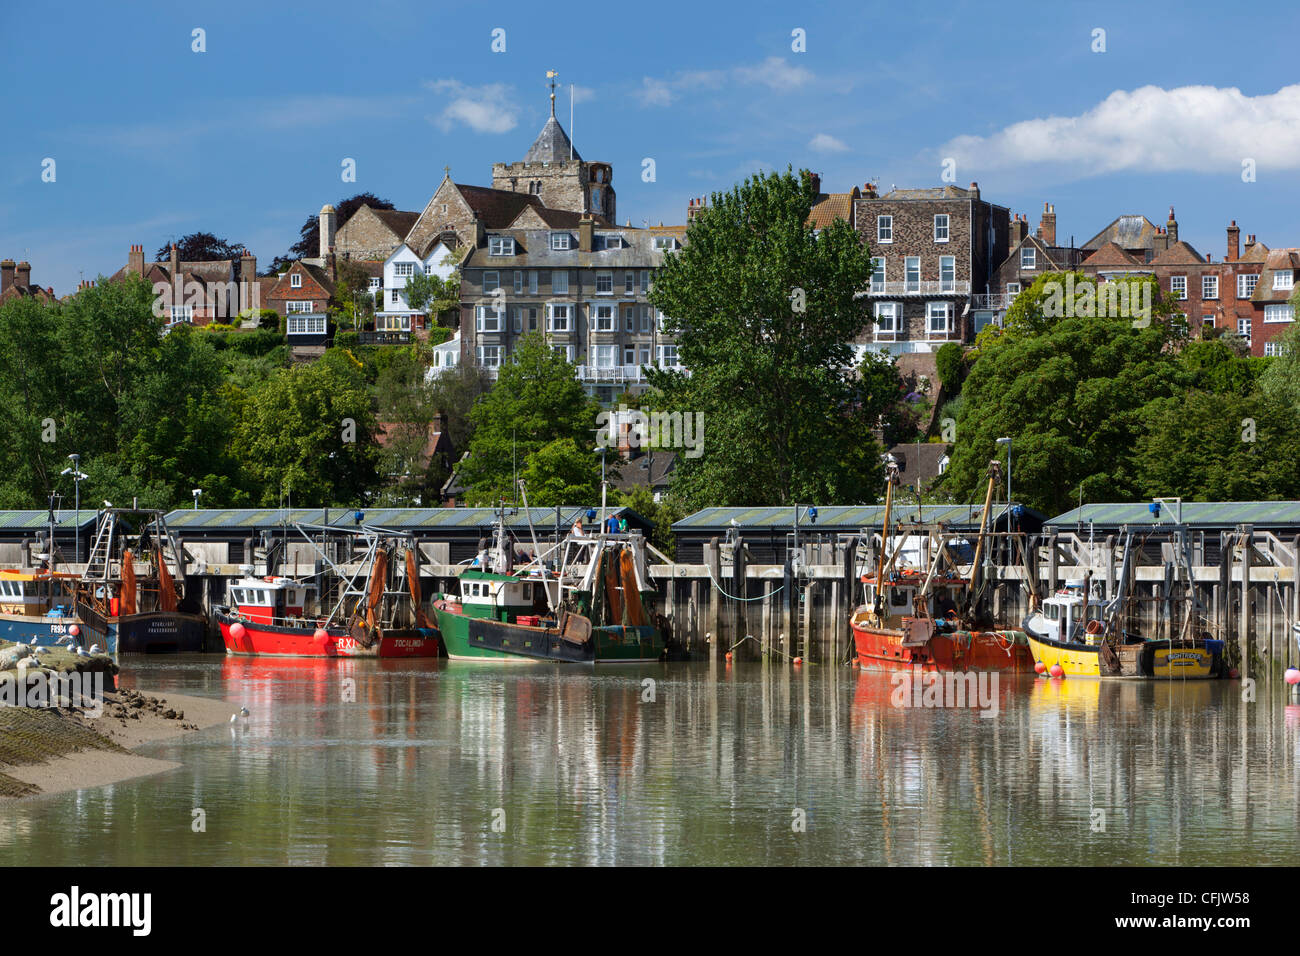 Fishing harbour on River Rother, old town, Rye, East Sussex England, United Kingdom, Europe Stock Photo